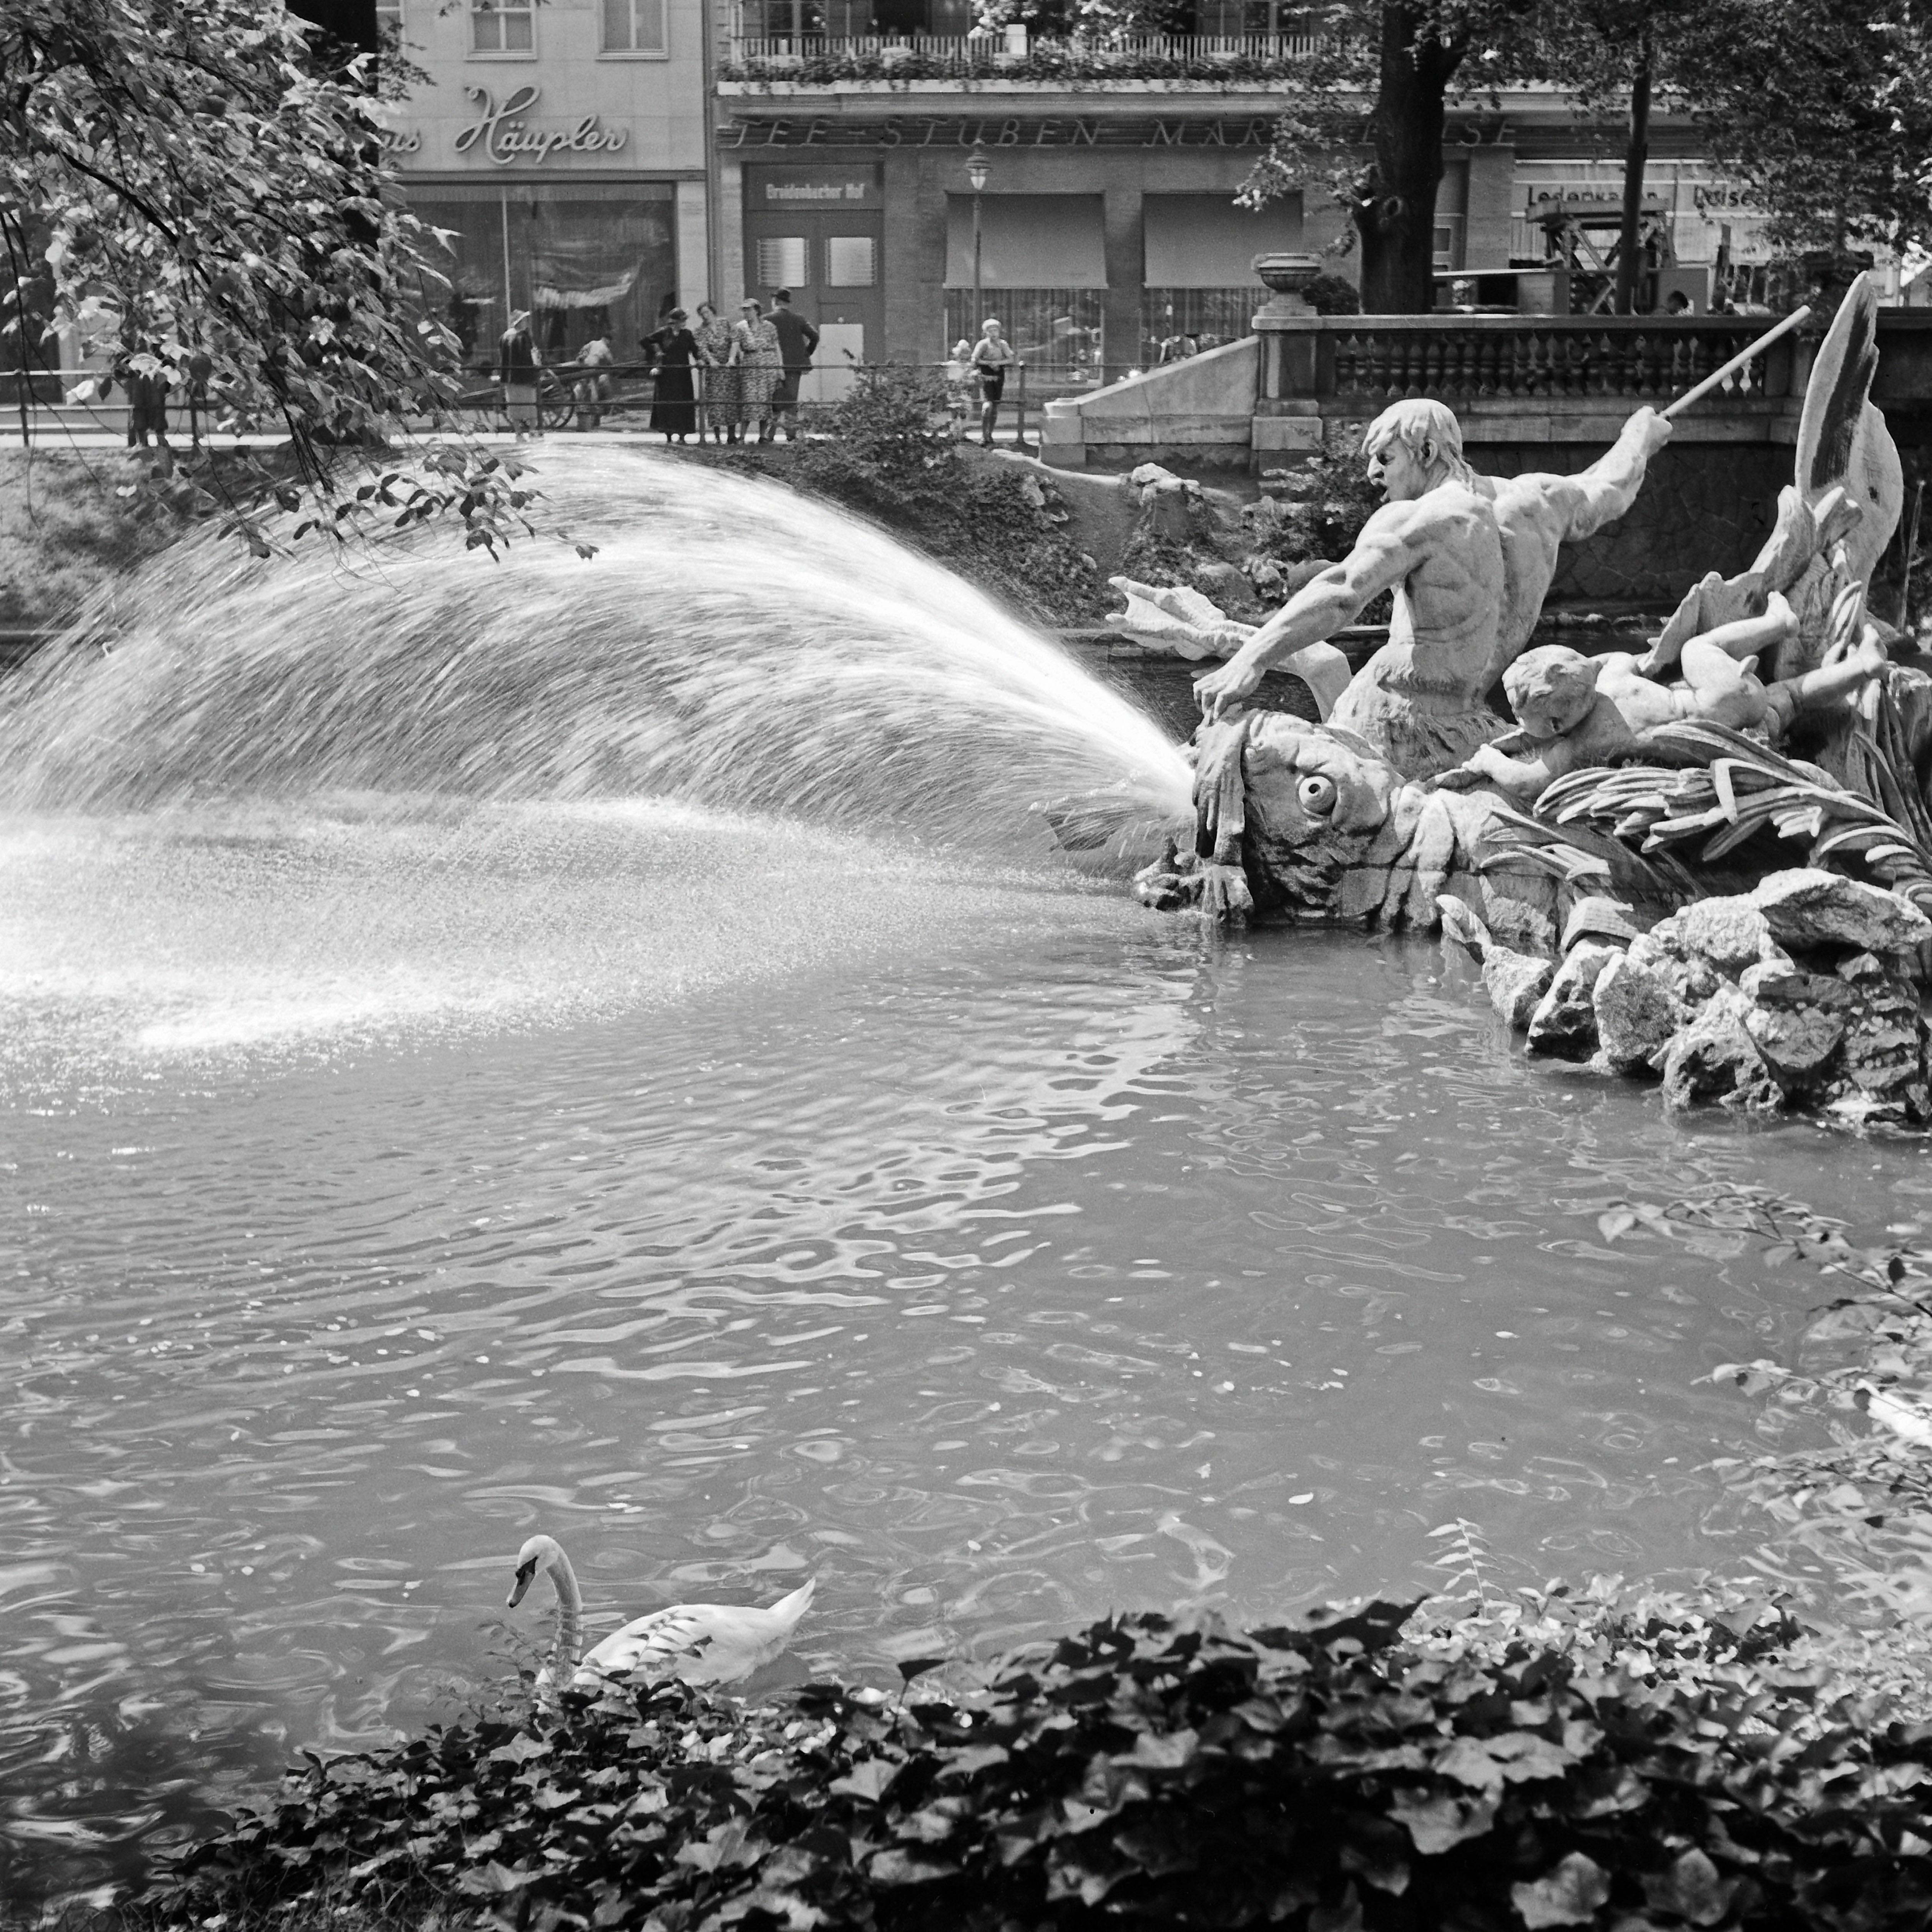 Karl Heinrich Lämmel Black and White Photograph - Tritons fountain at Koenigsallee avenue Duesseldorf, Germany 1937 Printed Later 